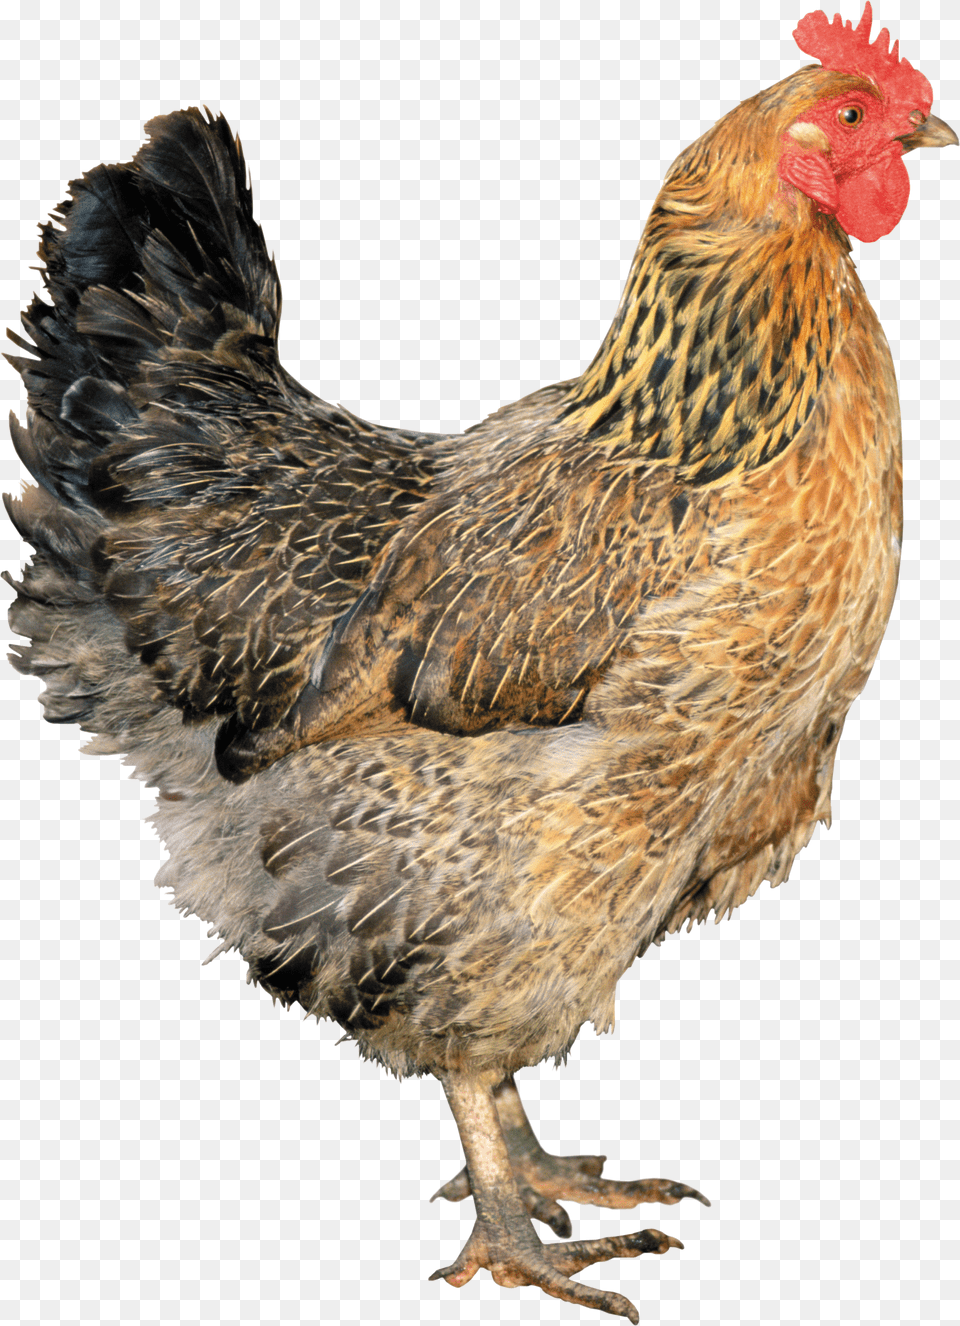 Download Gallo Gallina Animales Chicken Png